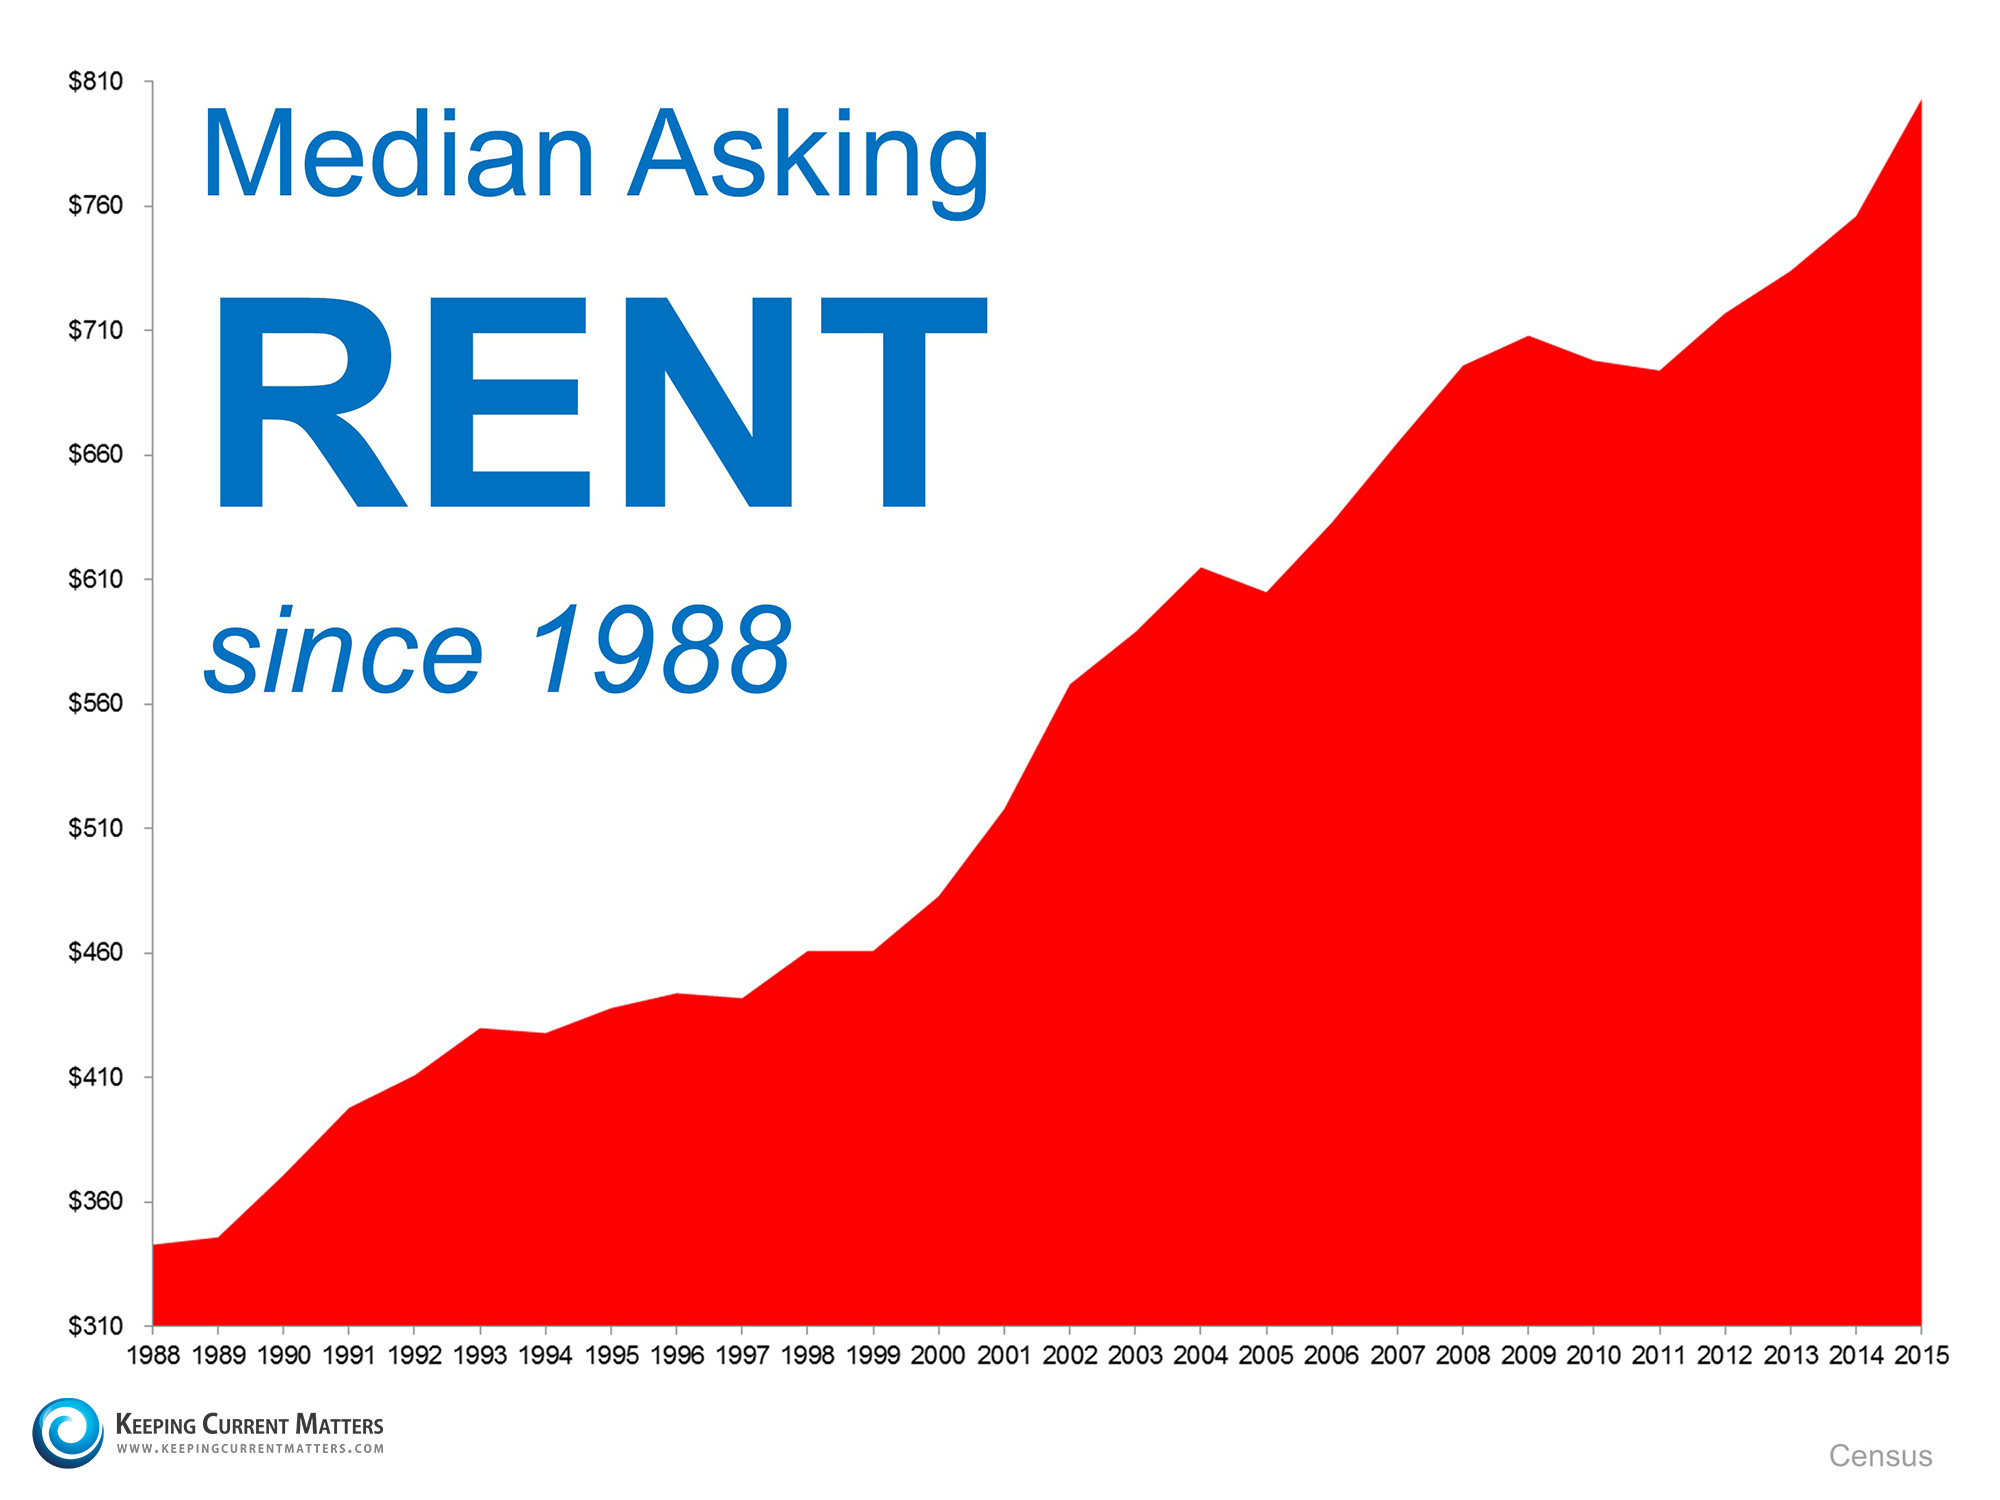 Median Asking Rents | Keeping Current Matters